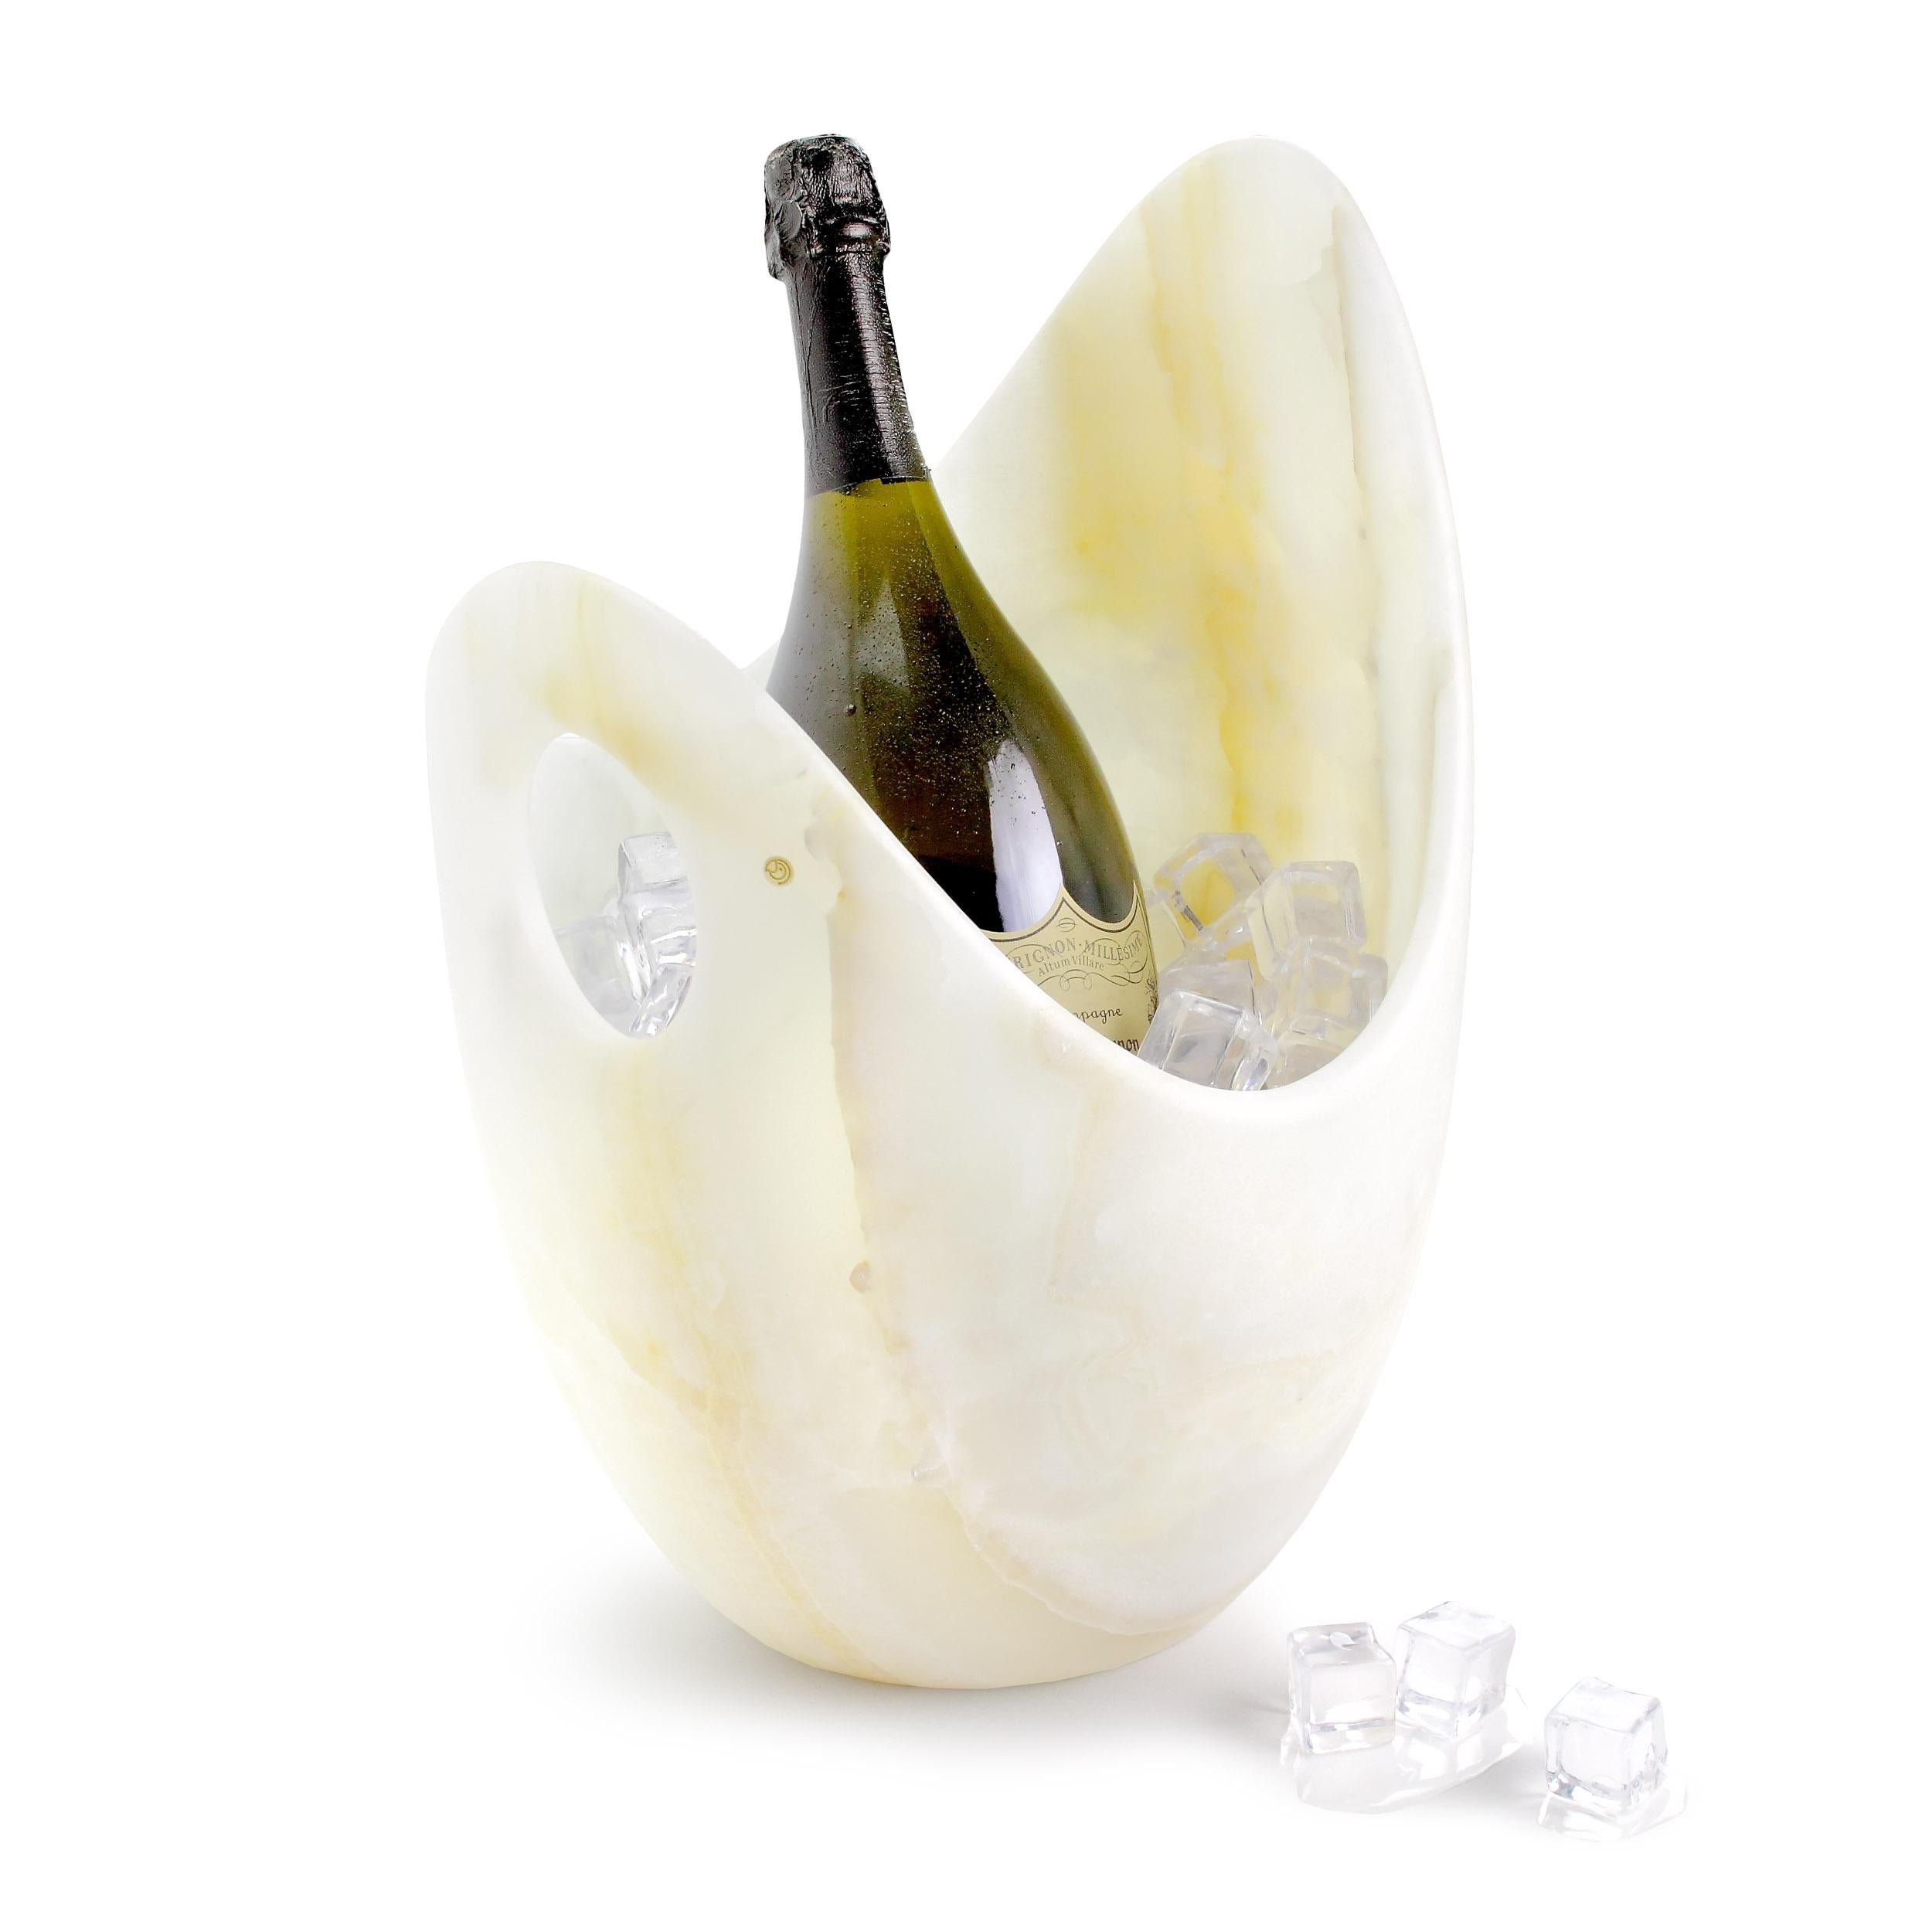 Luxurious and big Champagne bucket sculpted by hand from a solid block of white onyx. The polished finishing underlines the transparency of the onyx making this a very precious object. 

Champagne bucket dimensions: L 28 x W 29 x H 41 cm.